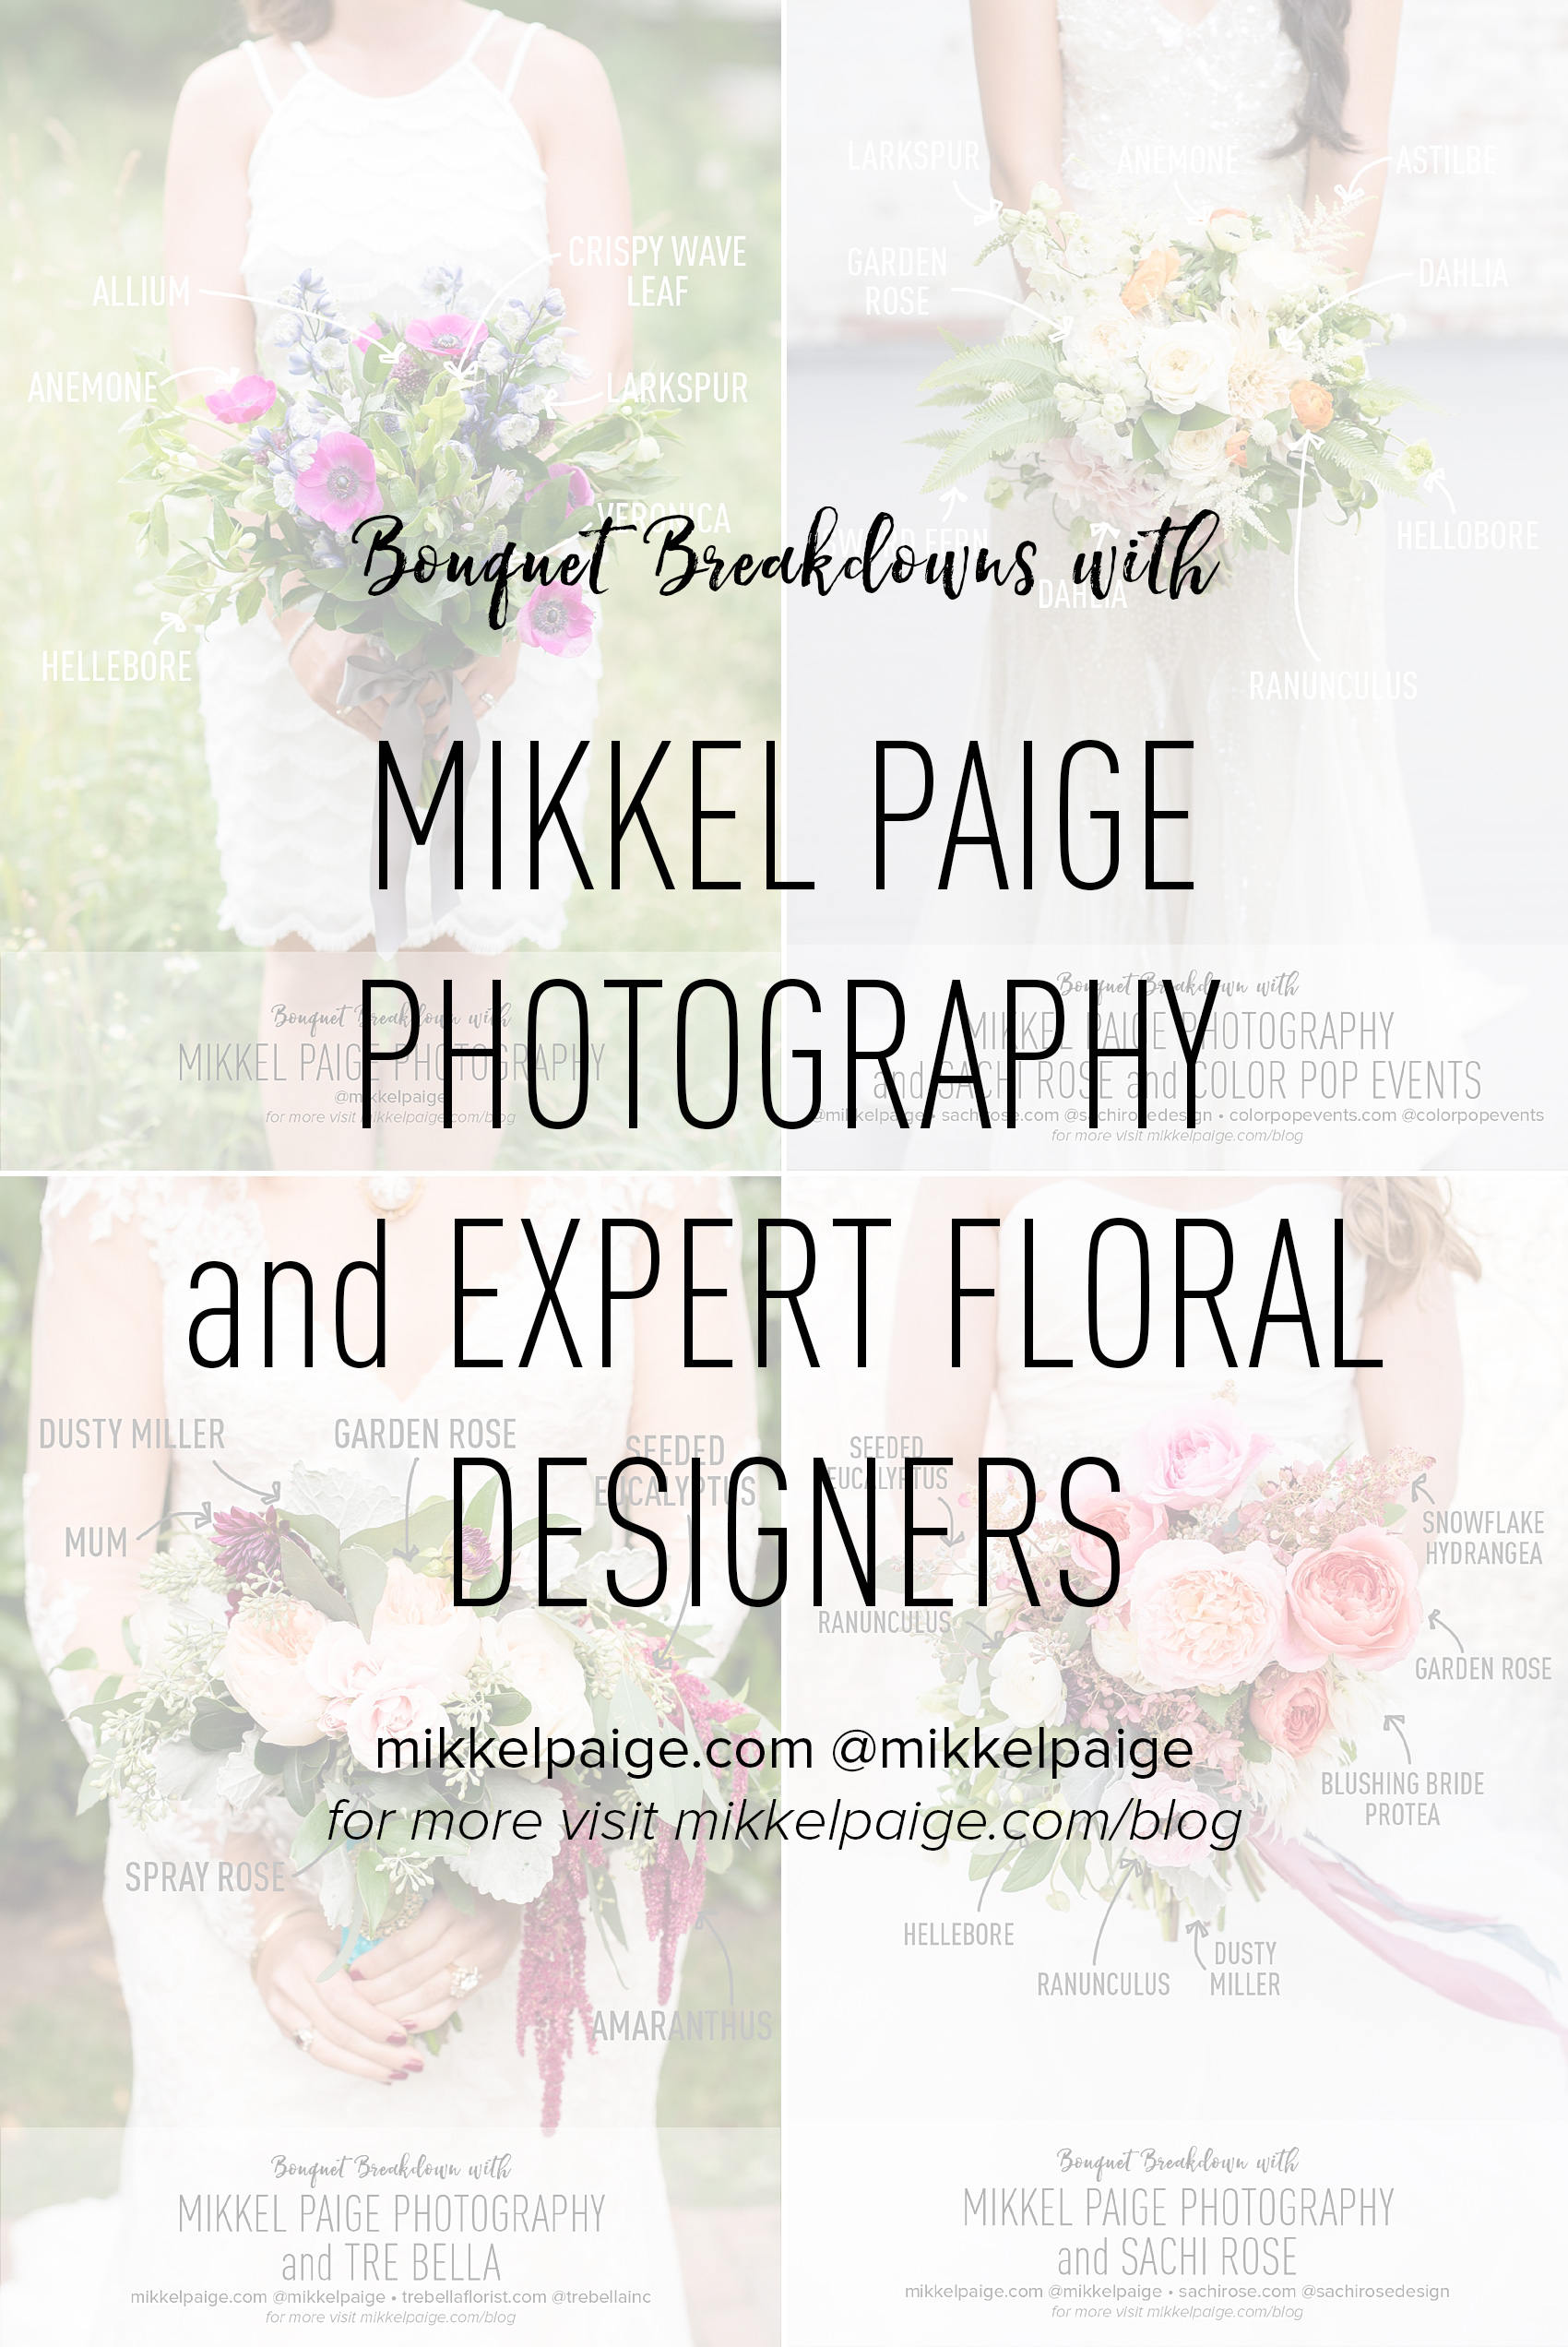 Mikkel Paige Photography does Bouquet Breakdown with flower labels identifying blossom varieties and types, with expert floral designers and florists.